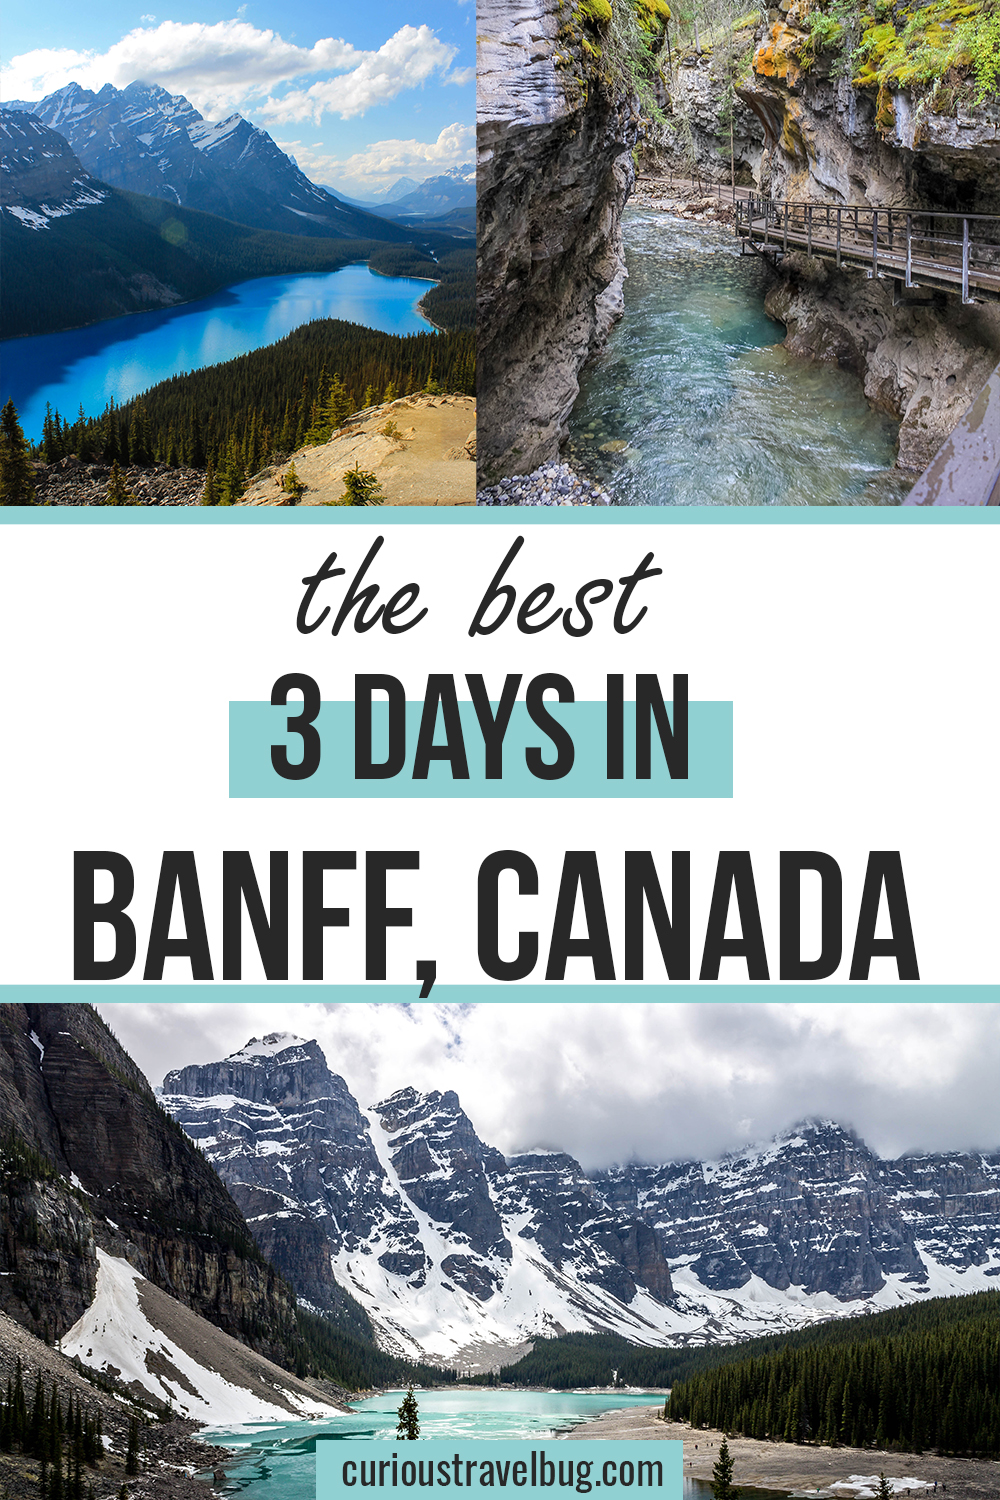 The most epic three day guide to Banff National Park in Canada. This guide covers the best sights to see, scenic roads to drive, top easy hikes, and everything you need to know for an amazing vacation including where to eat, where to sleep, and how to get around Banff. | Banff National Park | Banff National Park Summer | Things to do in Banff | banff national park summer road trips | banff canada | what to do in banff canada